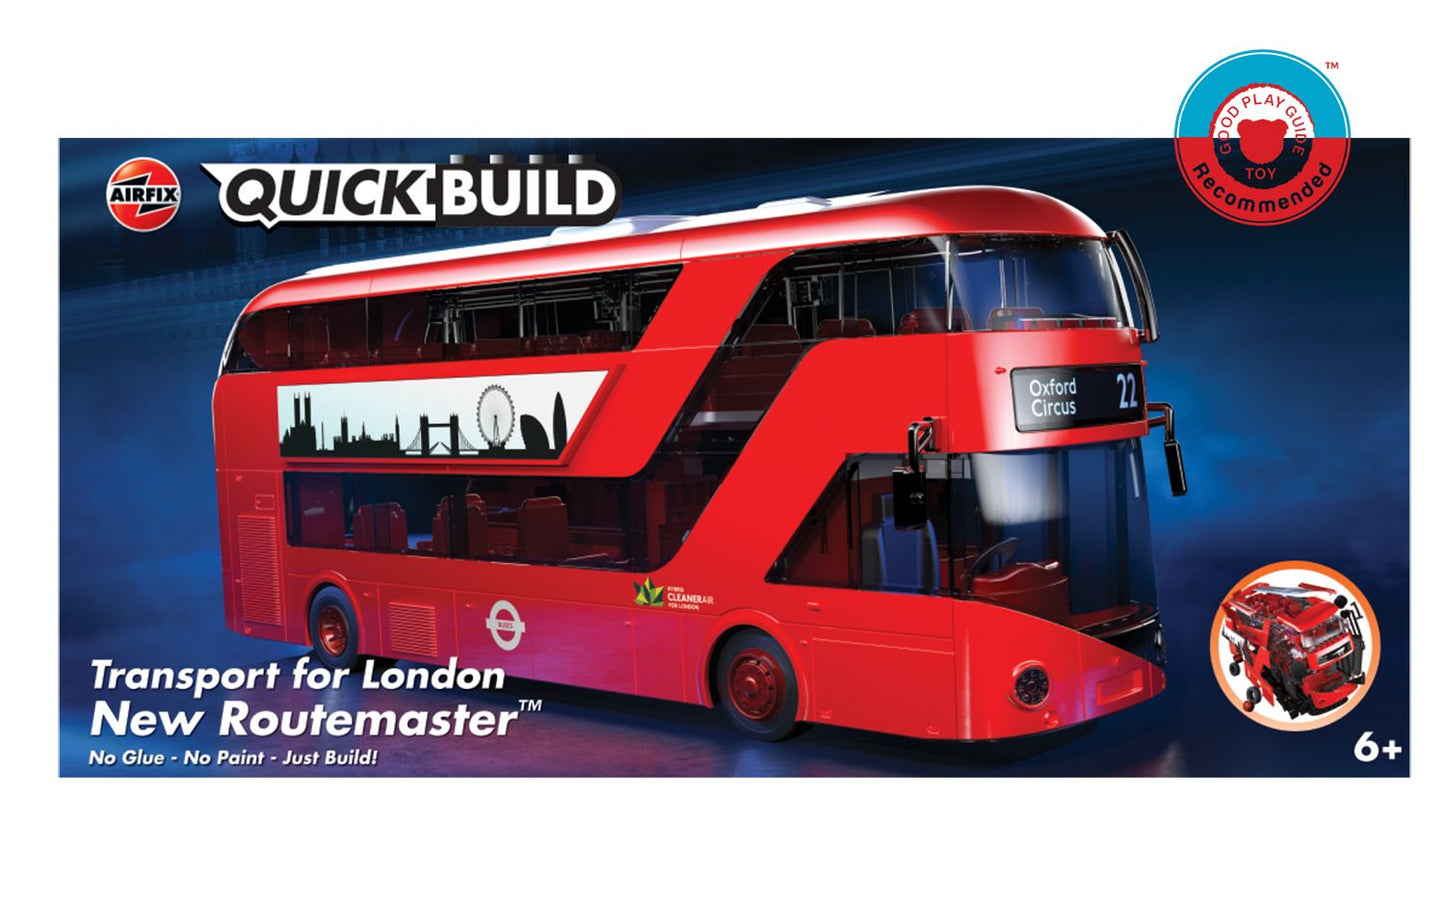 Routemaster Bus -Transport for London Quick Build